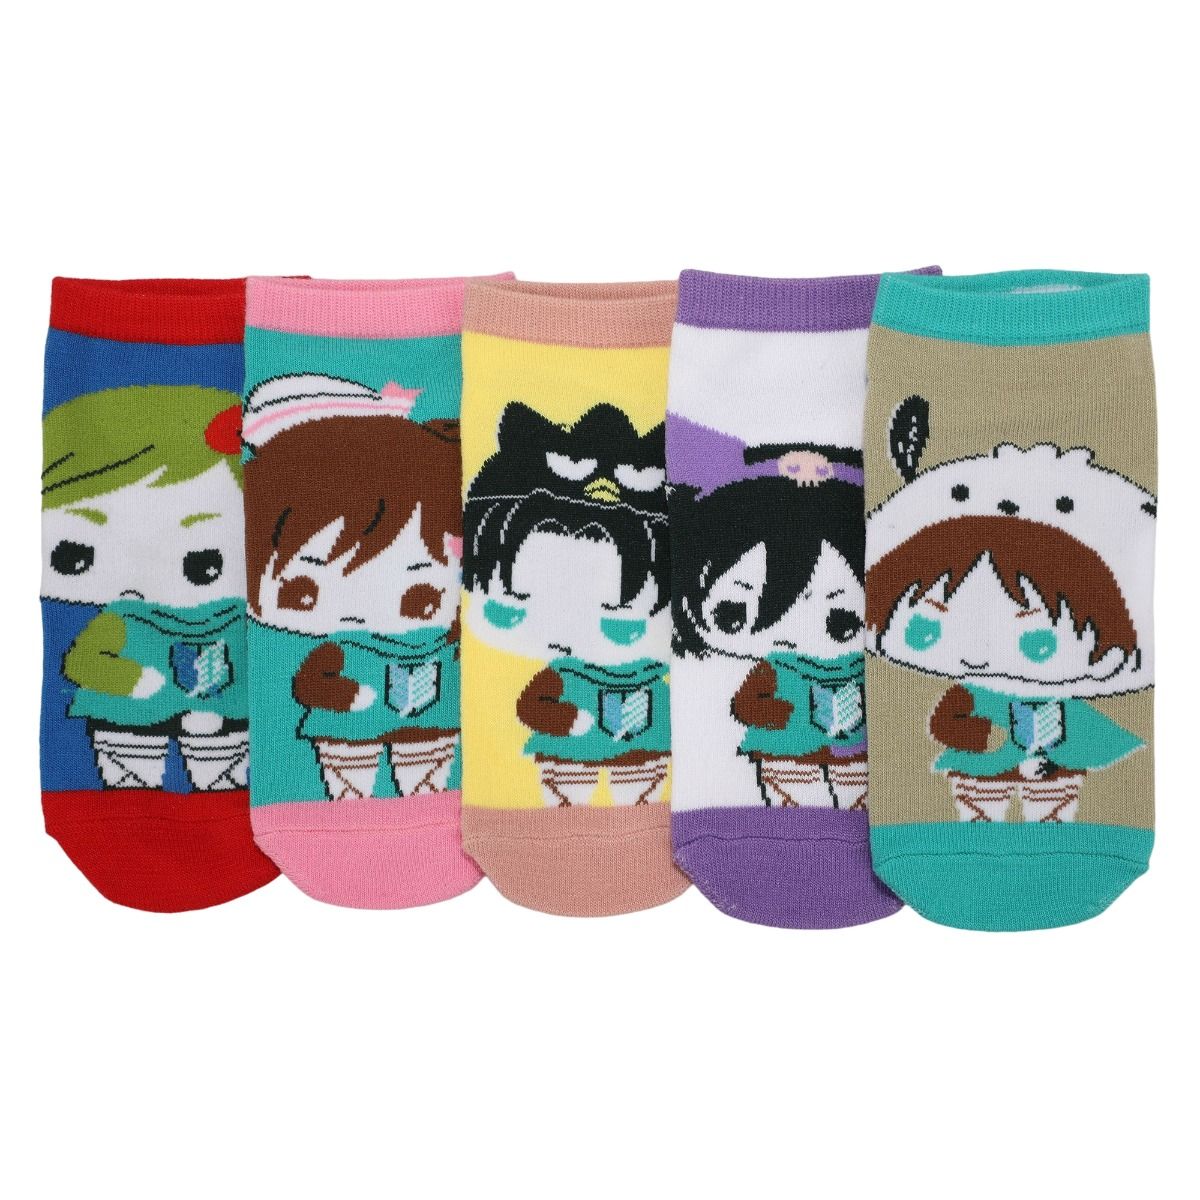 Hello Kitty X Attack on Titan 5-Pairs Ankle Socks Pack